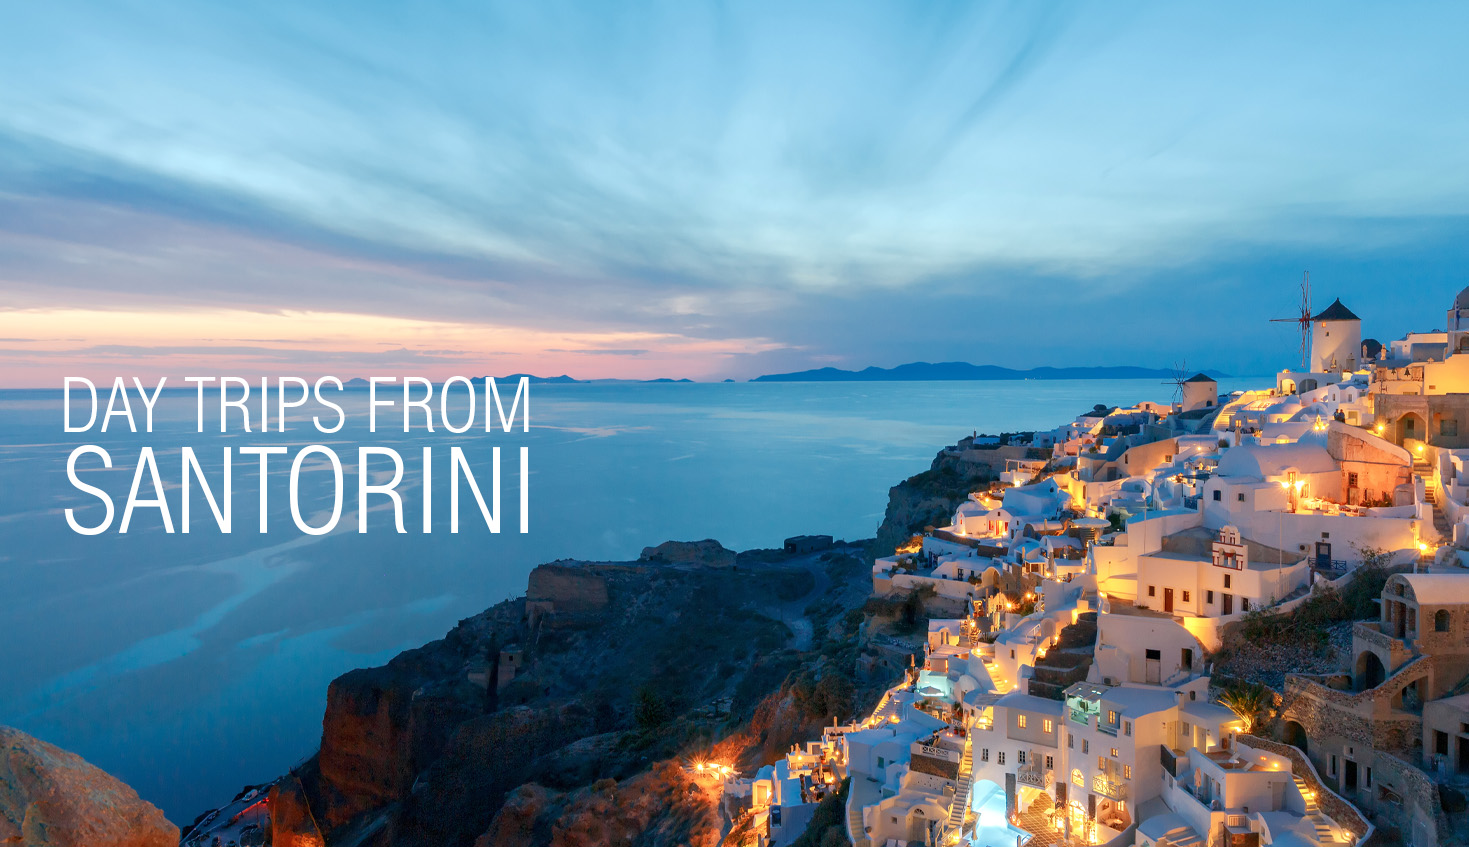 Day Trips from Santorini